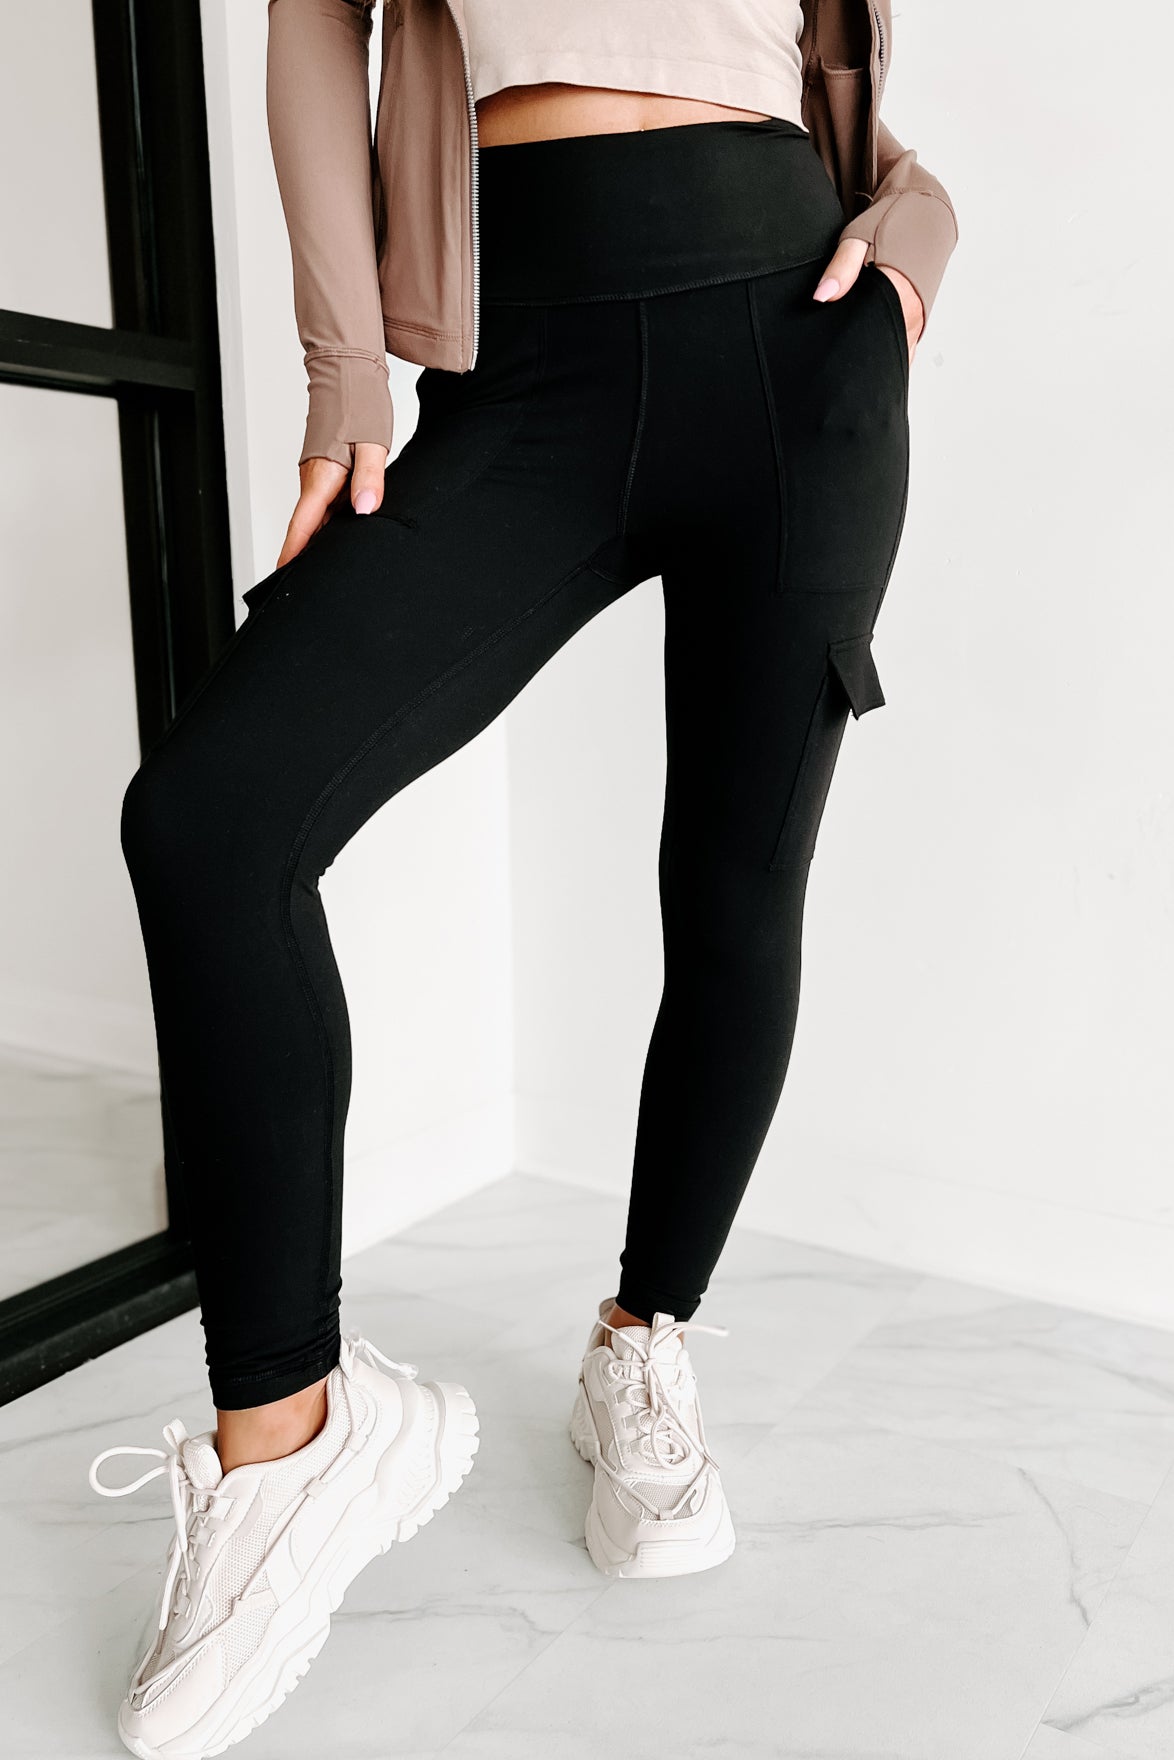 Knix Stashable High Waisted Black Leggings with Pockets Small